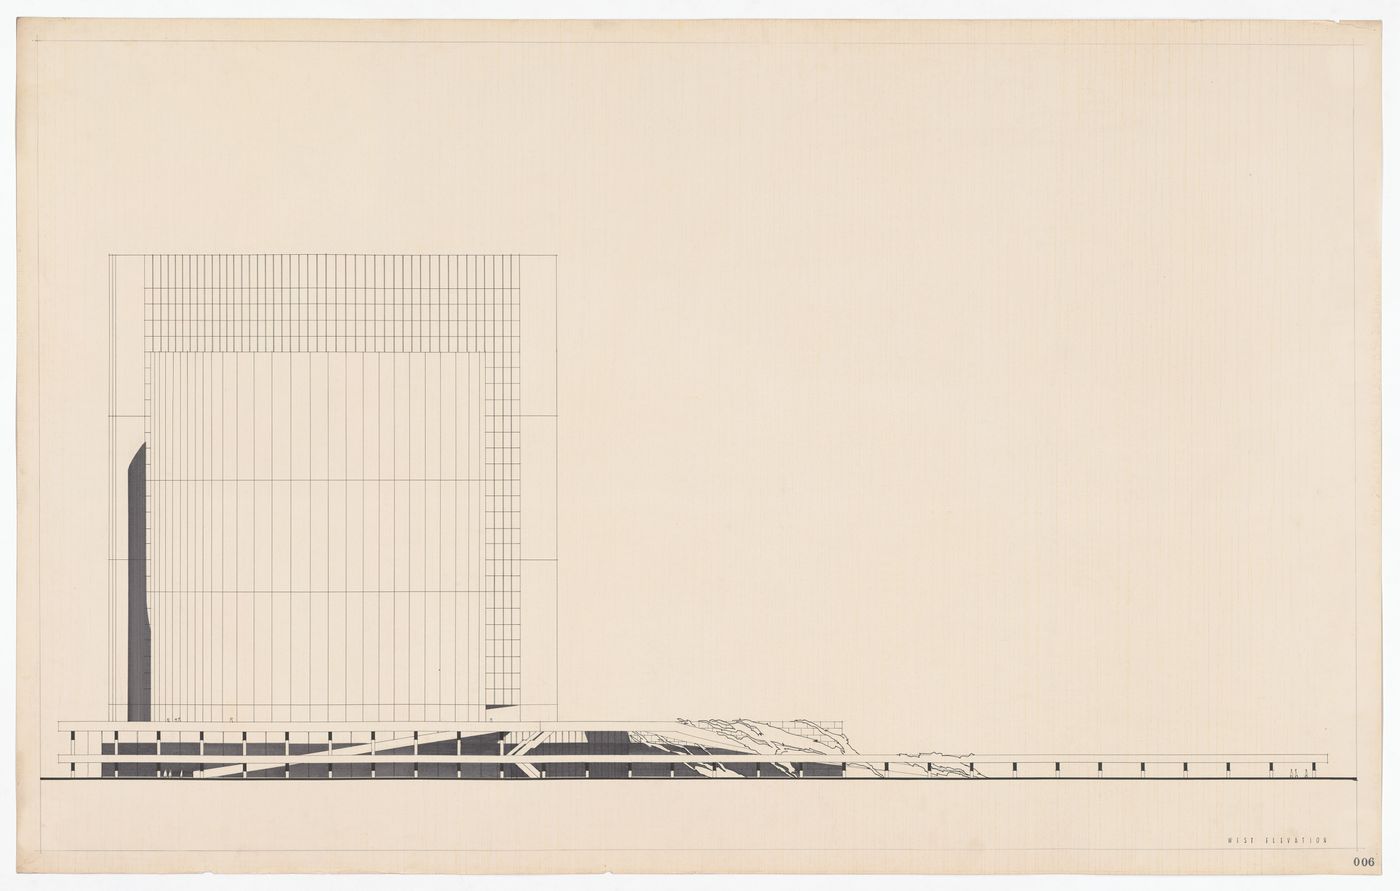 West elevation for Toronto City Hall and Civic Square, Toronto